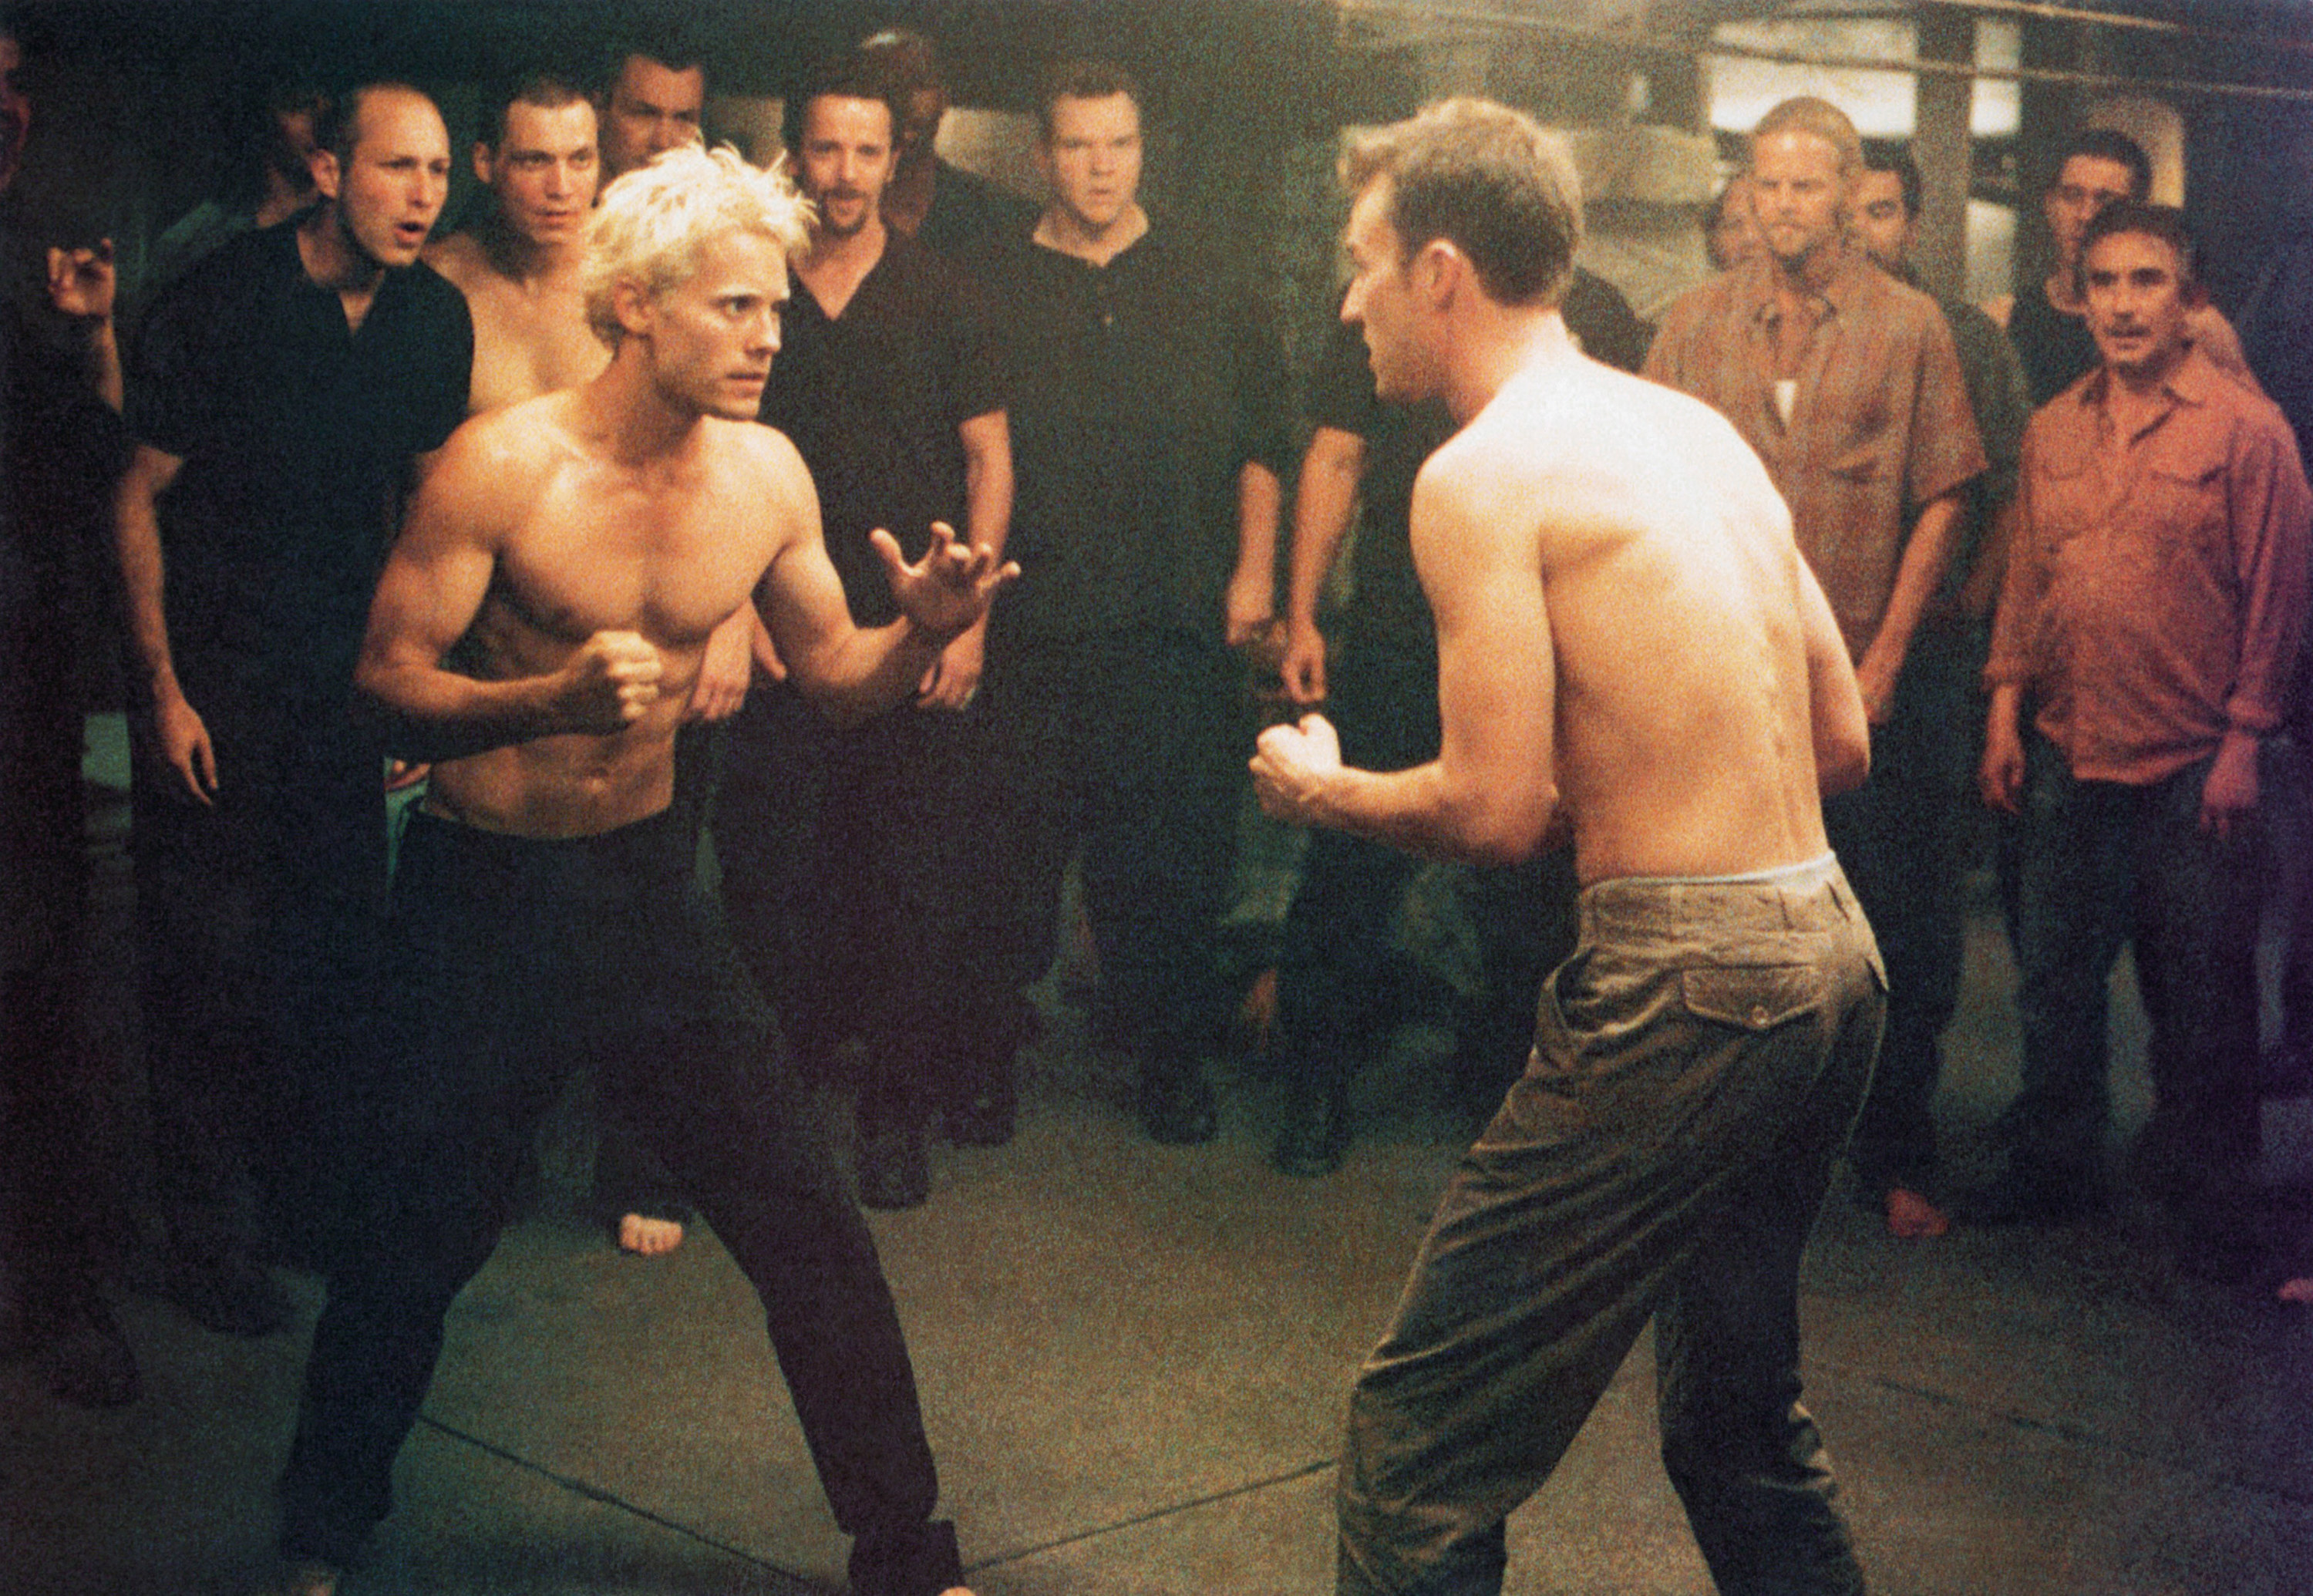 Two men in the fight club fight